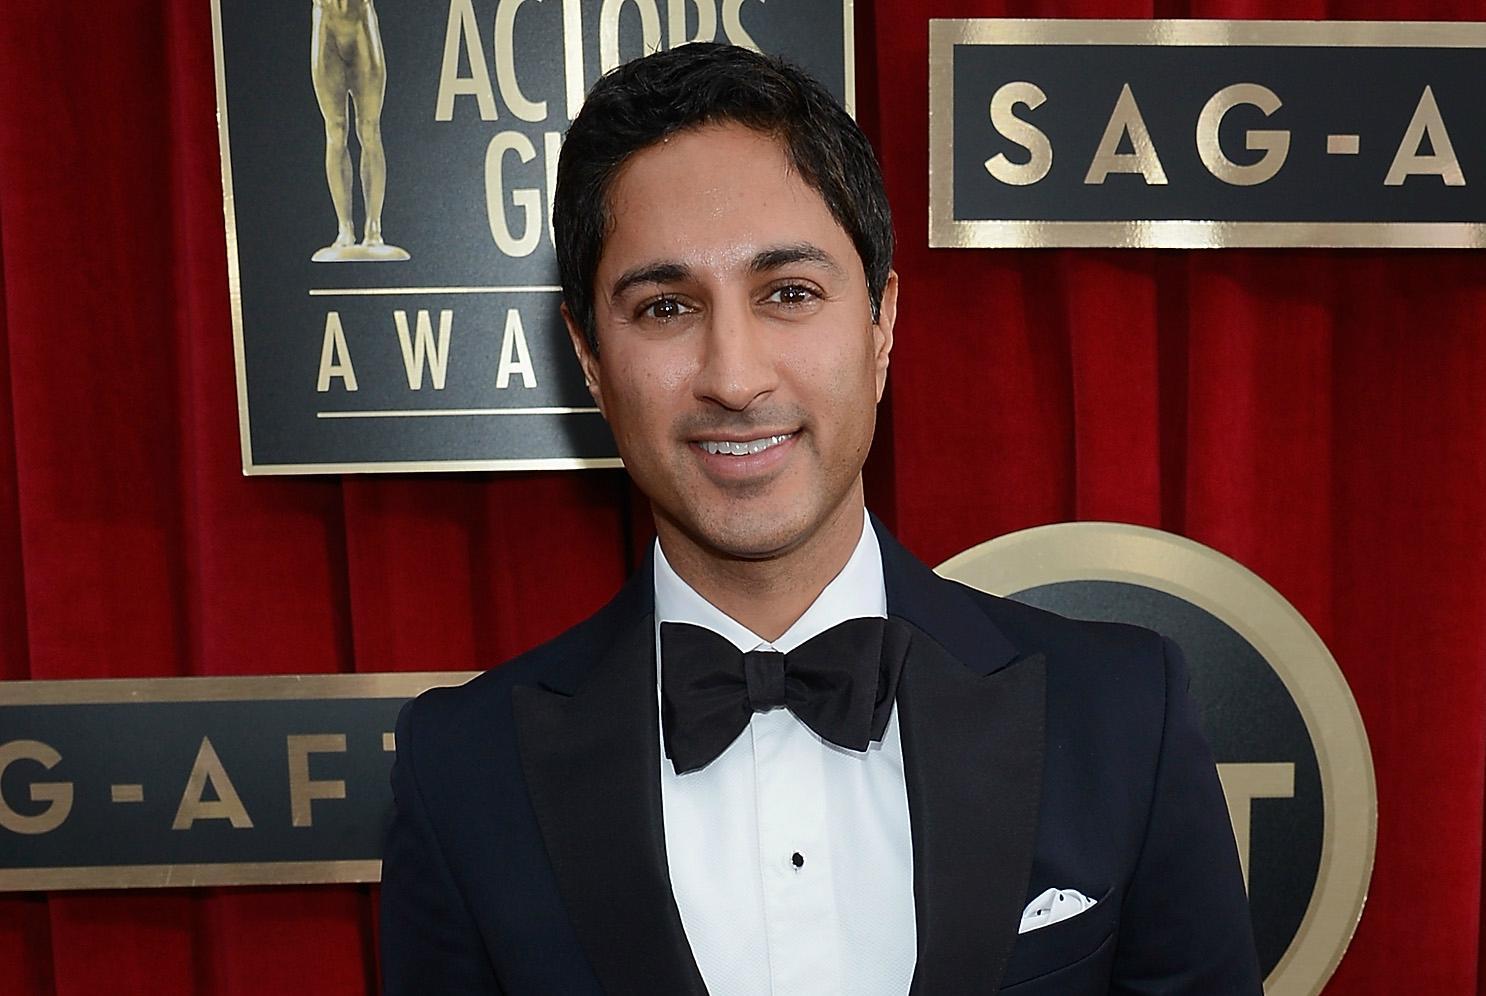 Maulik Pancholy’s speech at a middle school in Pennsylvania cancelled after school board vote